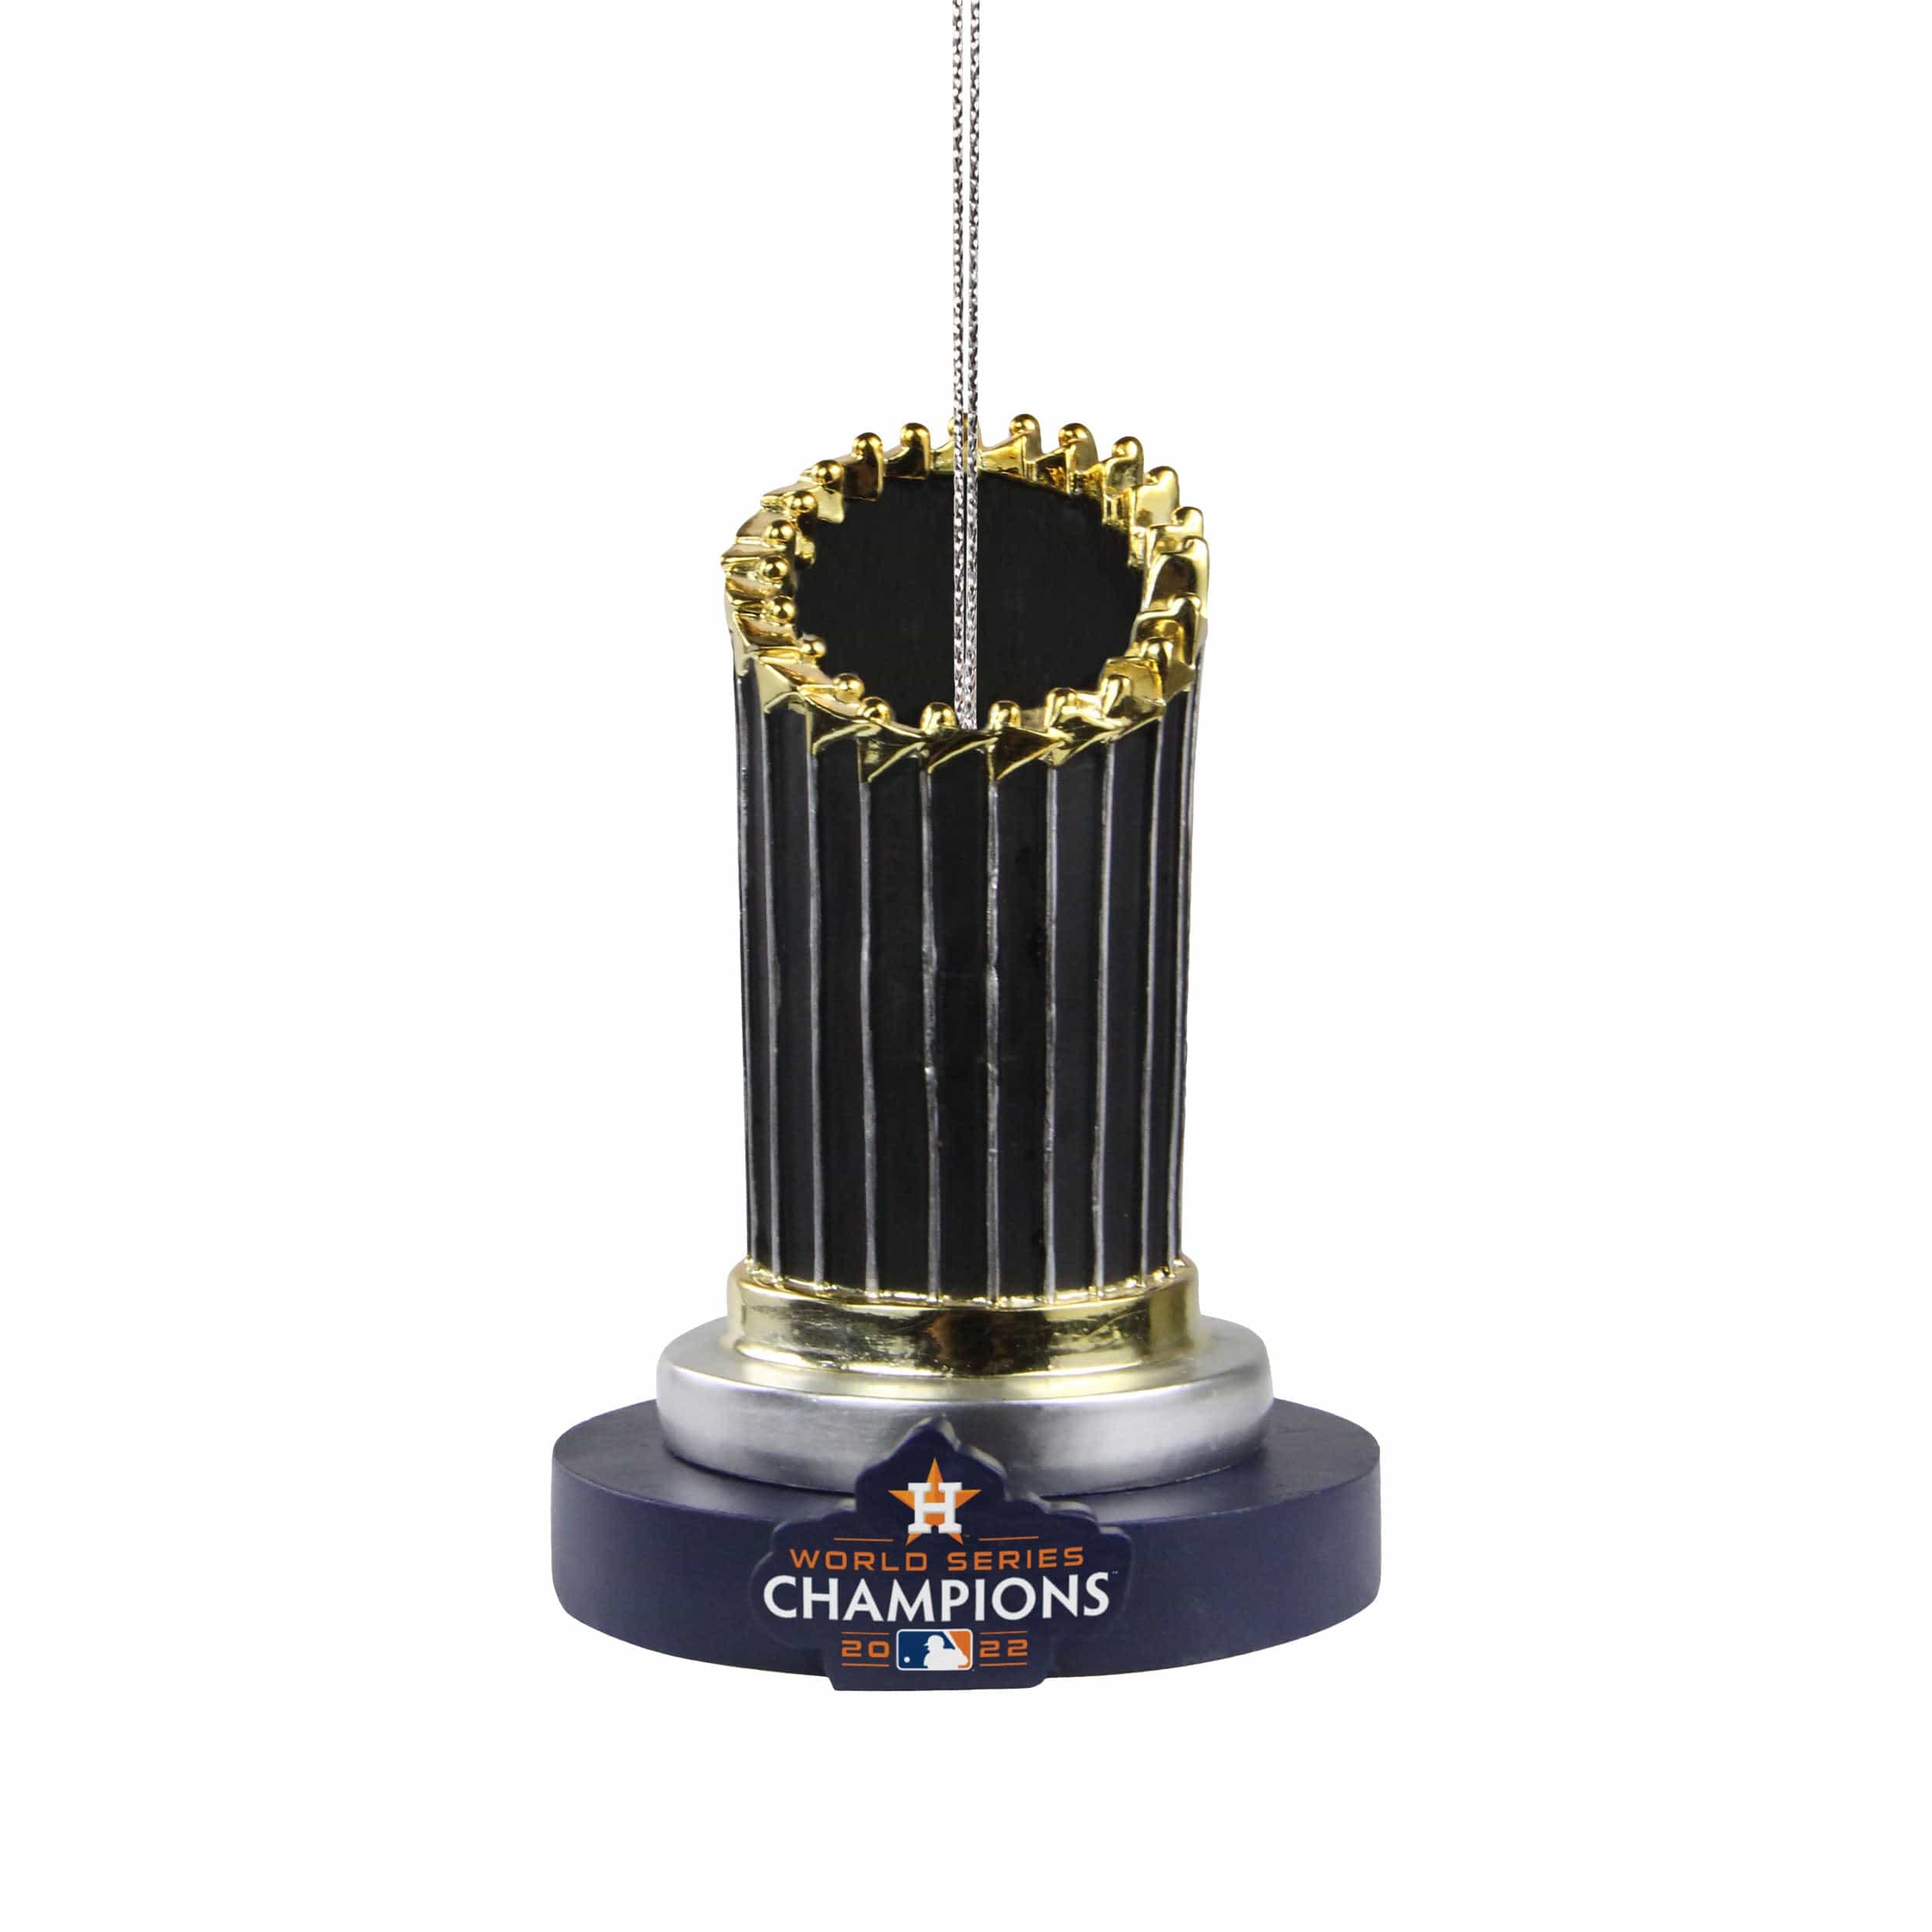  Astros Throwback Jersey Ceramic Christmas Ornament 2022 World  Series,American League Champions-Ready to Ship : Home & Kitchen